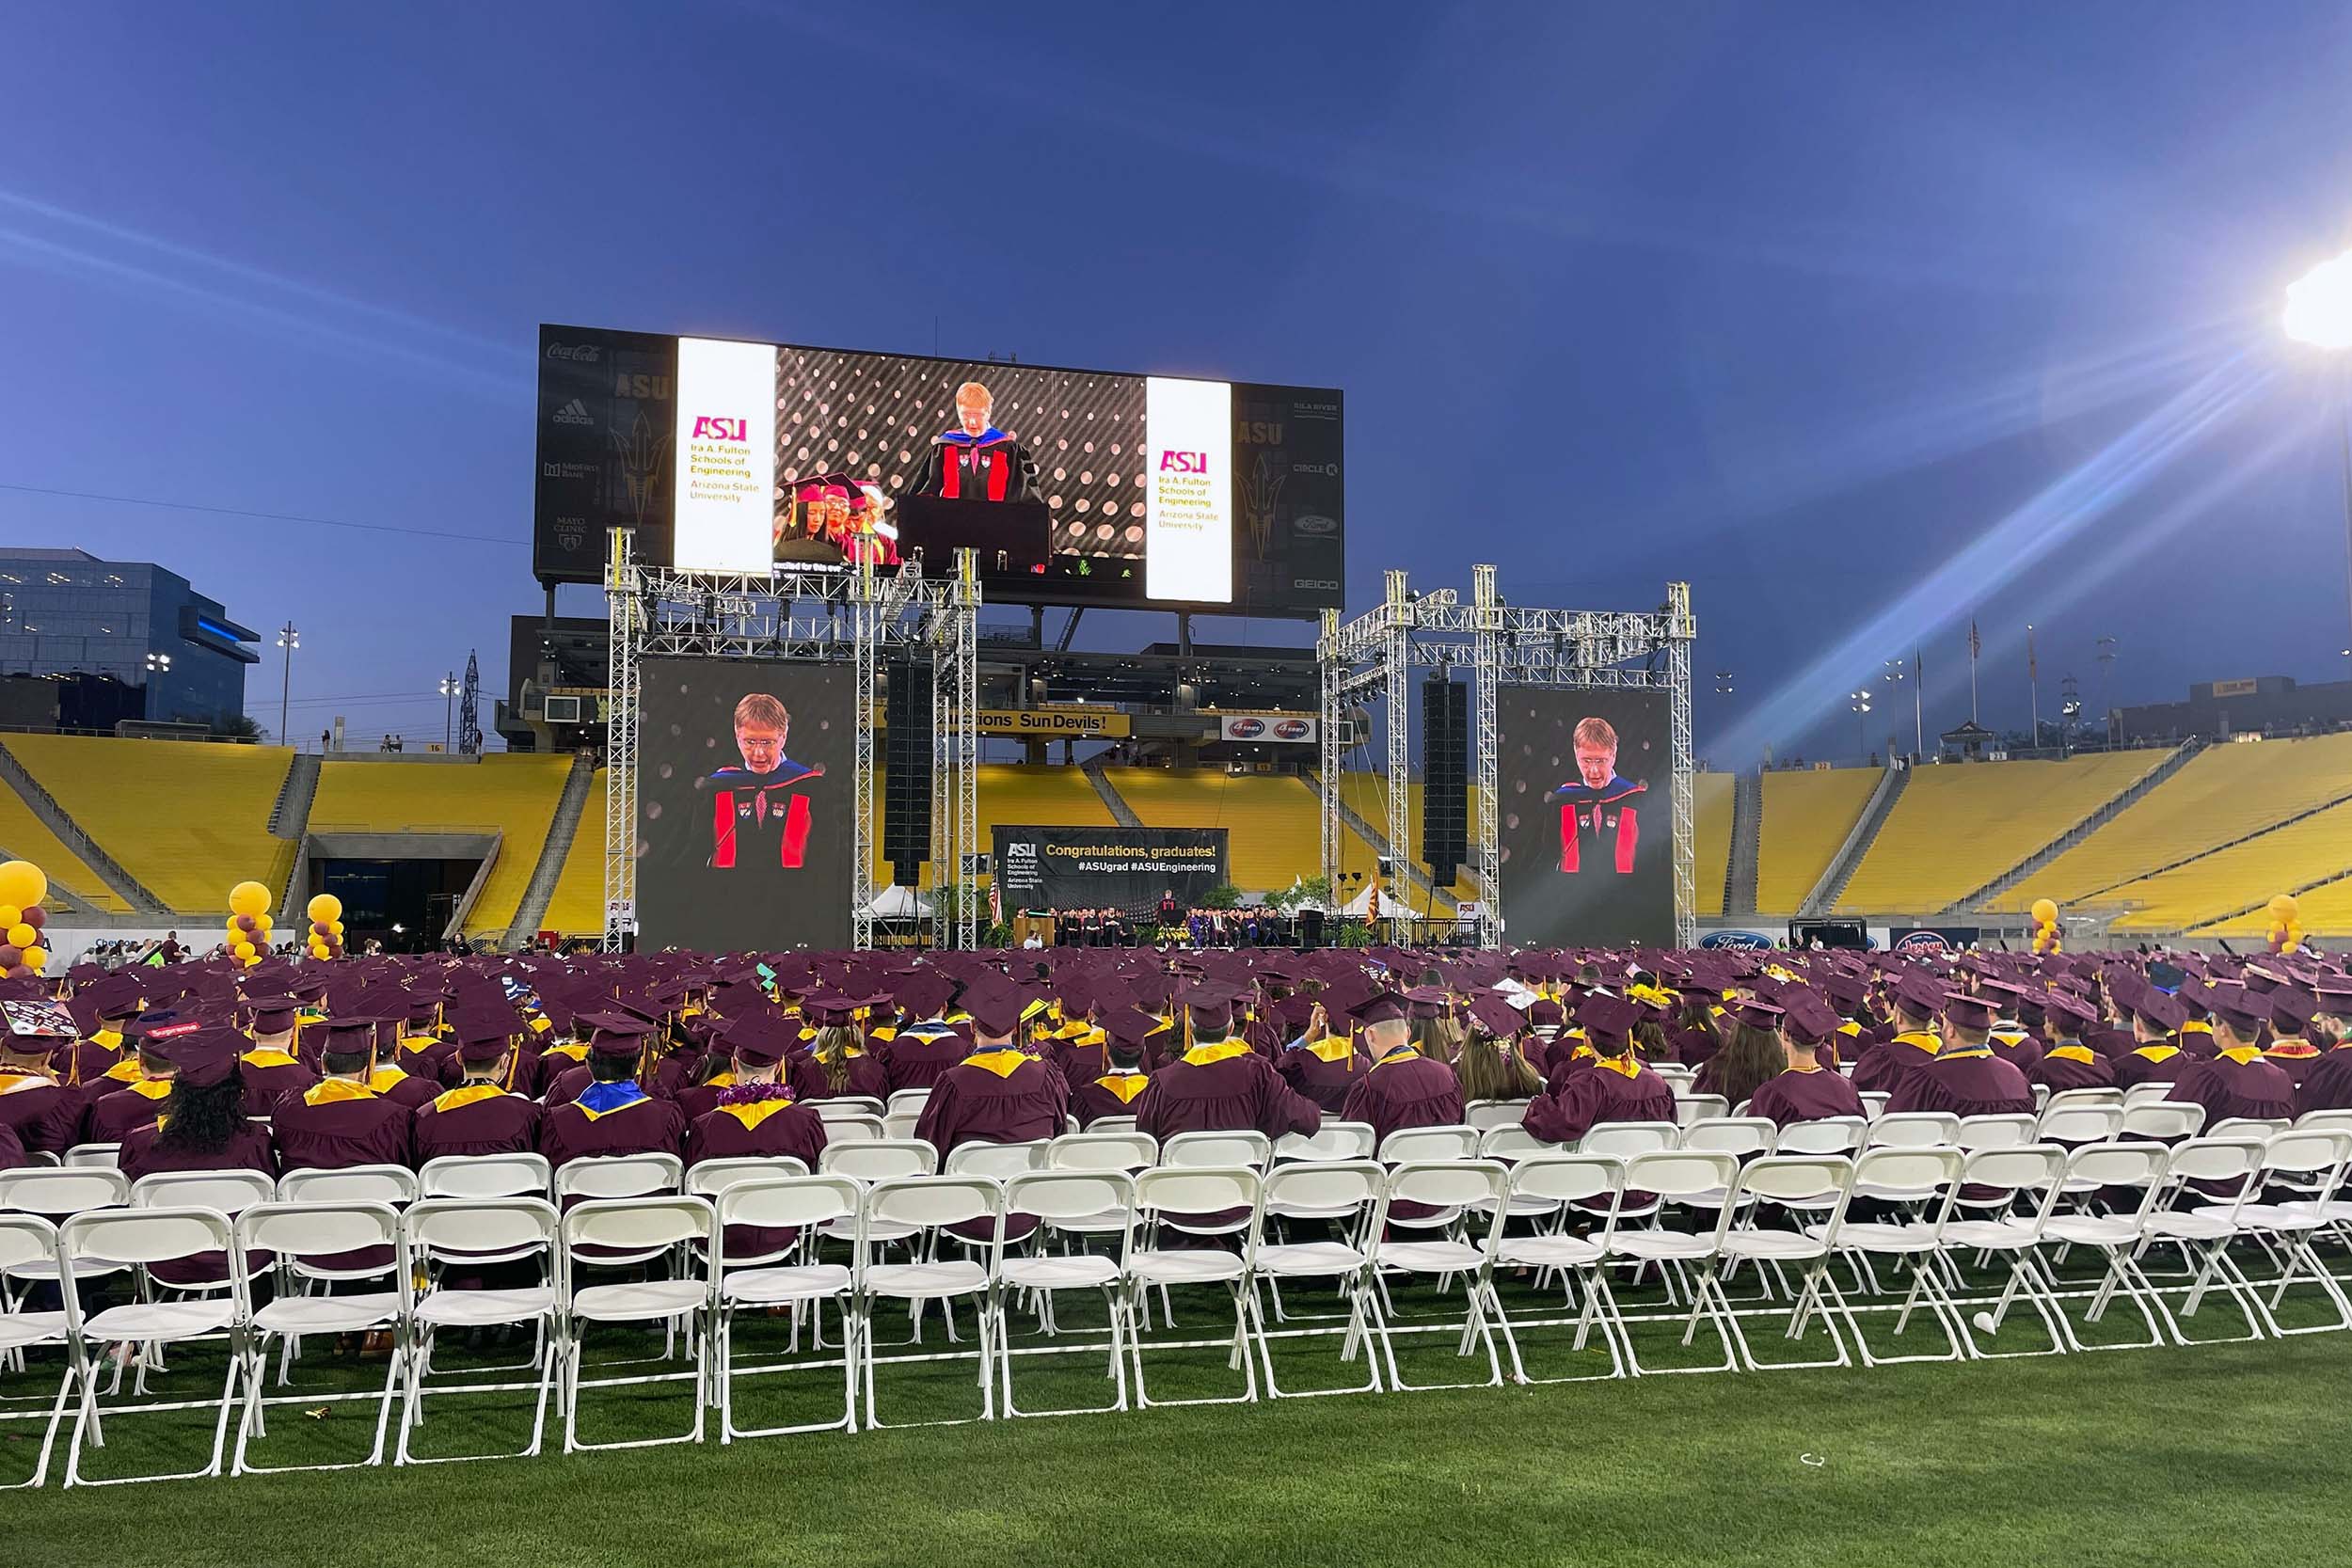 The 3,053 Spring 2022 ASU Engineering graduates stand on the field of Sun Devil Stadium at the end of Convocation in their caps and gowns, listening to Dean Kyle Squires at the podium